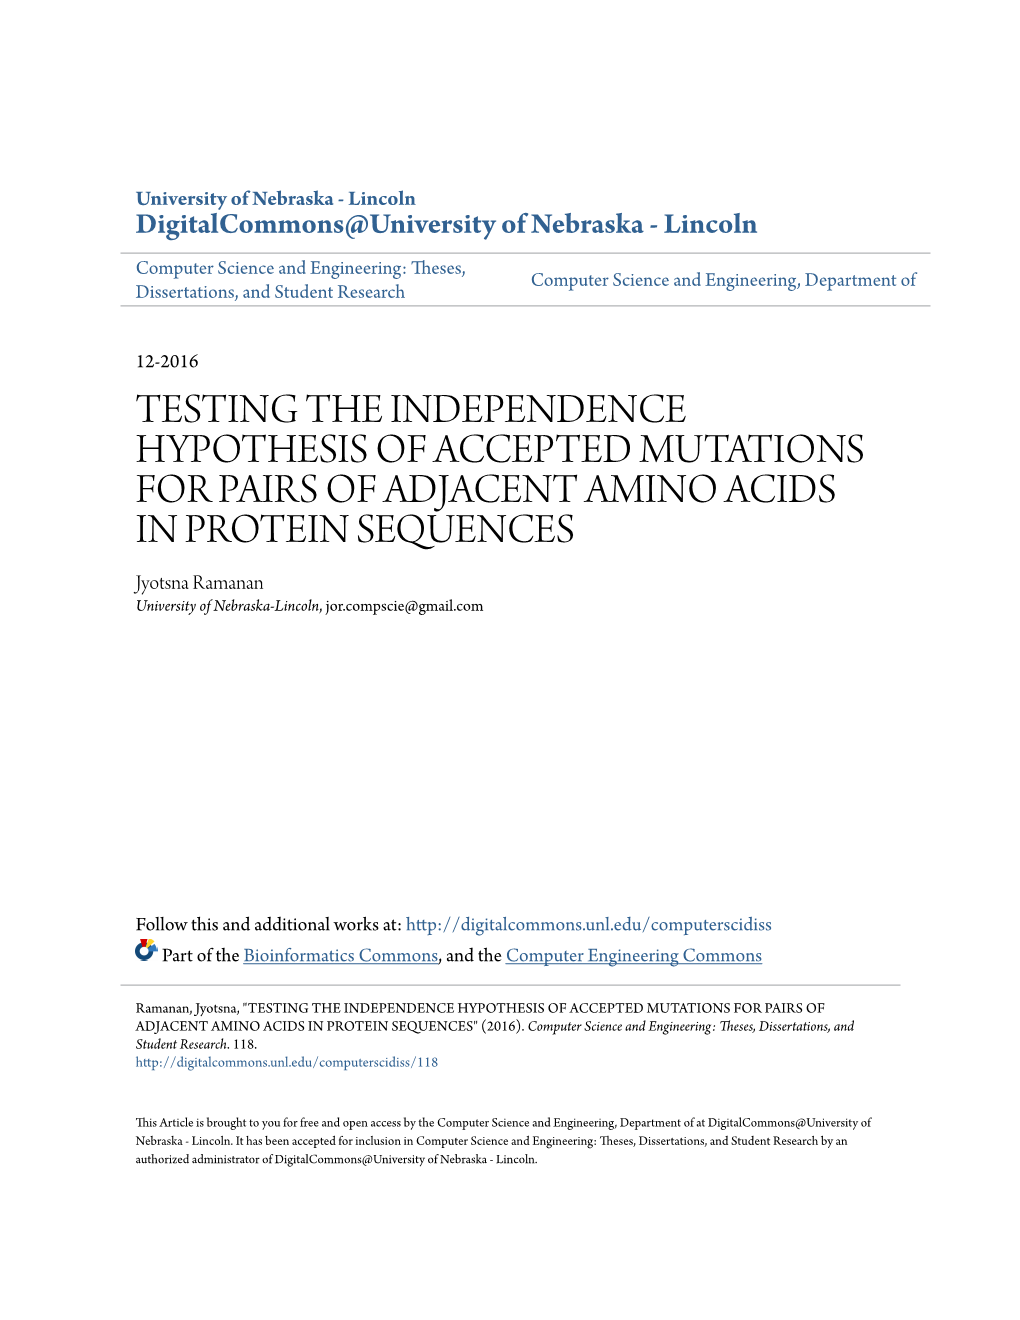 Testing the Independence Hypothesis of Accepted Mutations for Pairs Of